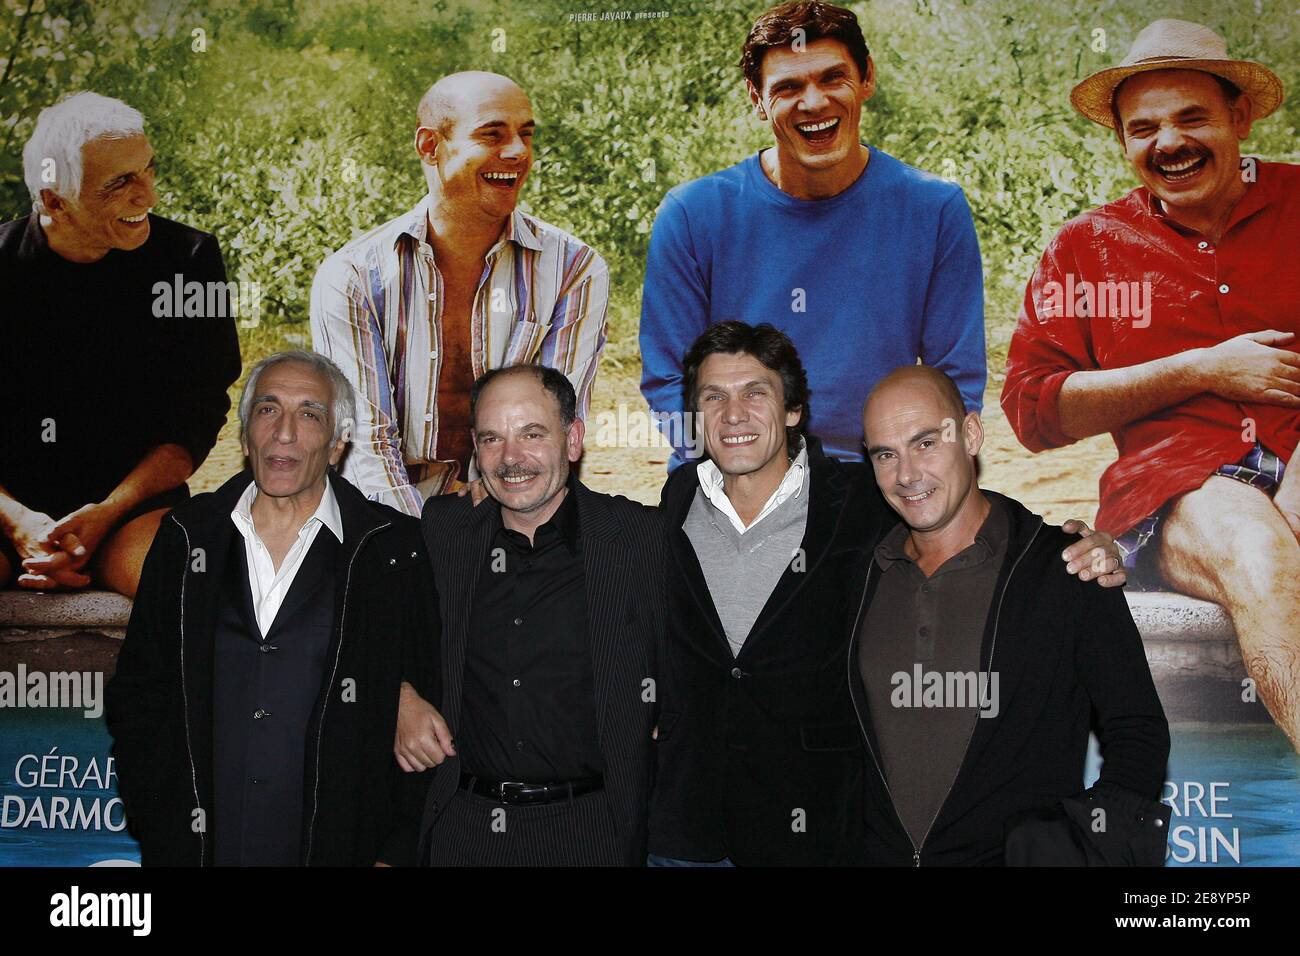 Gerard Darmon, Jean-Pierre Darroussin, Marc Lavoine, Bernard Campan attend the premiere of Le Coeur des Hommes 2, held at the Gaumont Marignan theater in Paris, France, on October 15, 2007. Photo by Thierry Orban/ABACAPRESS.COM Stock Photo